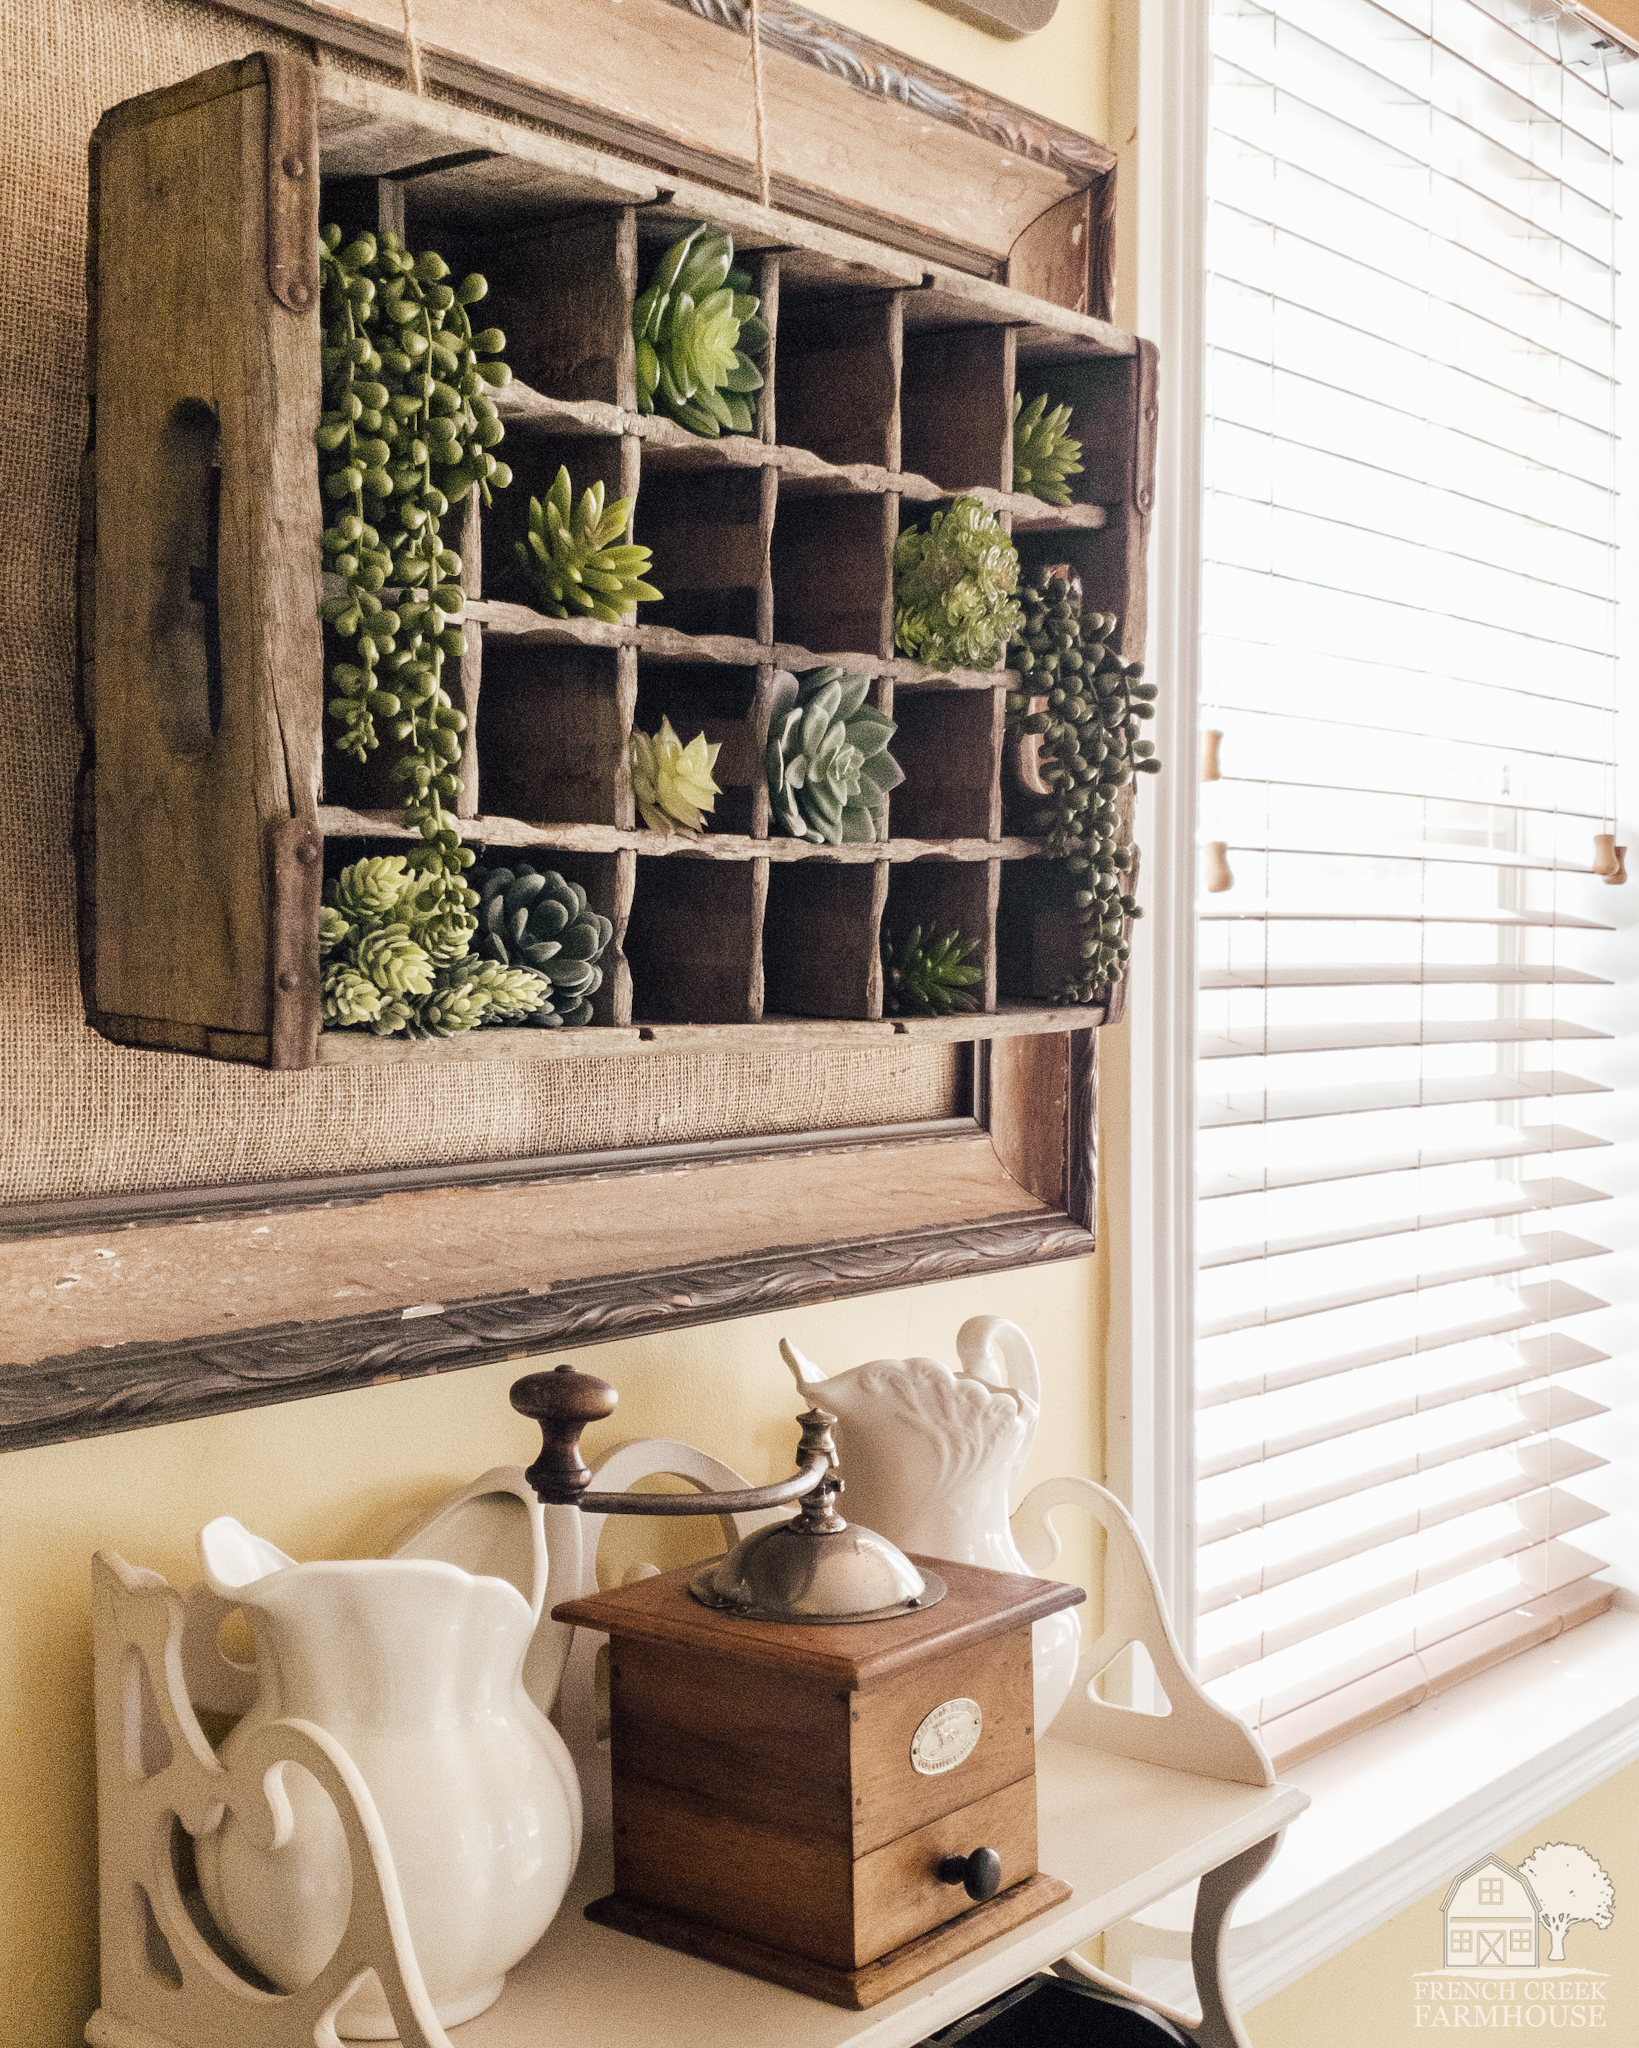 Rustic French Country wall decor with succulents and ironstone pitchers